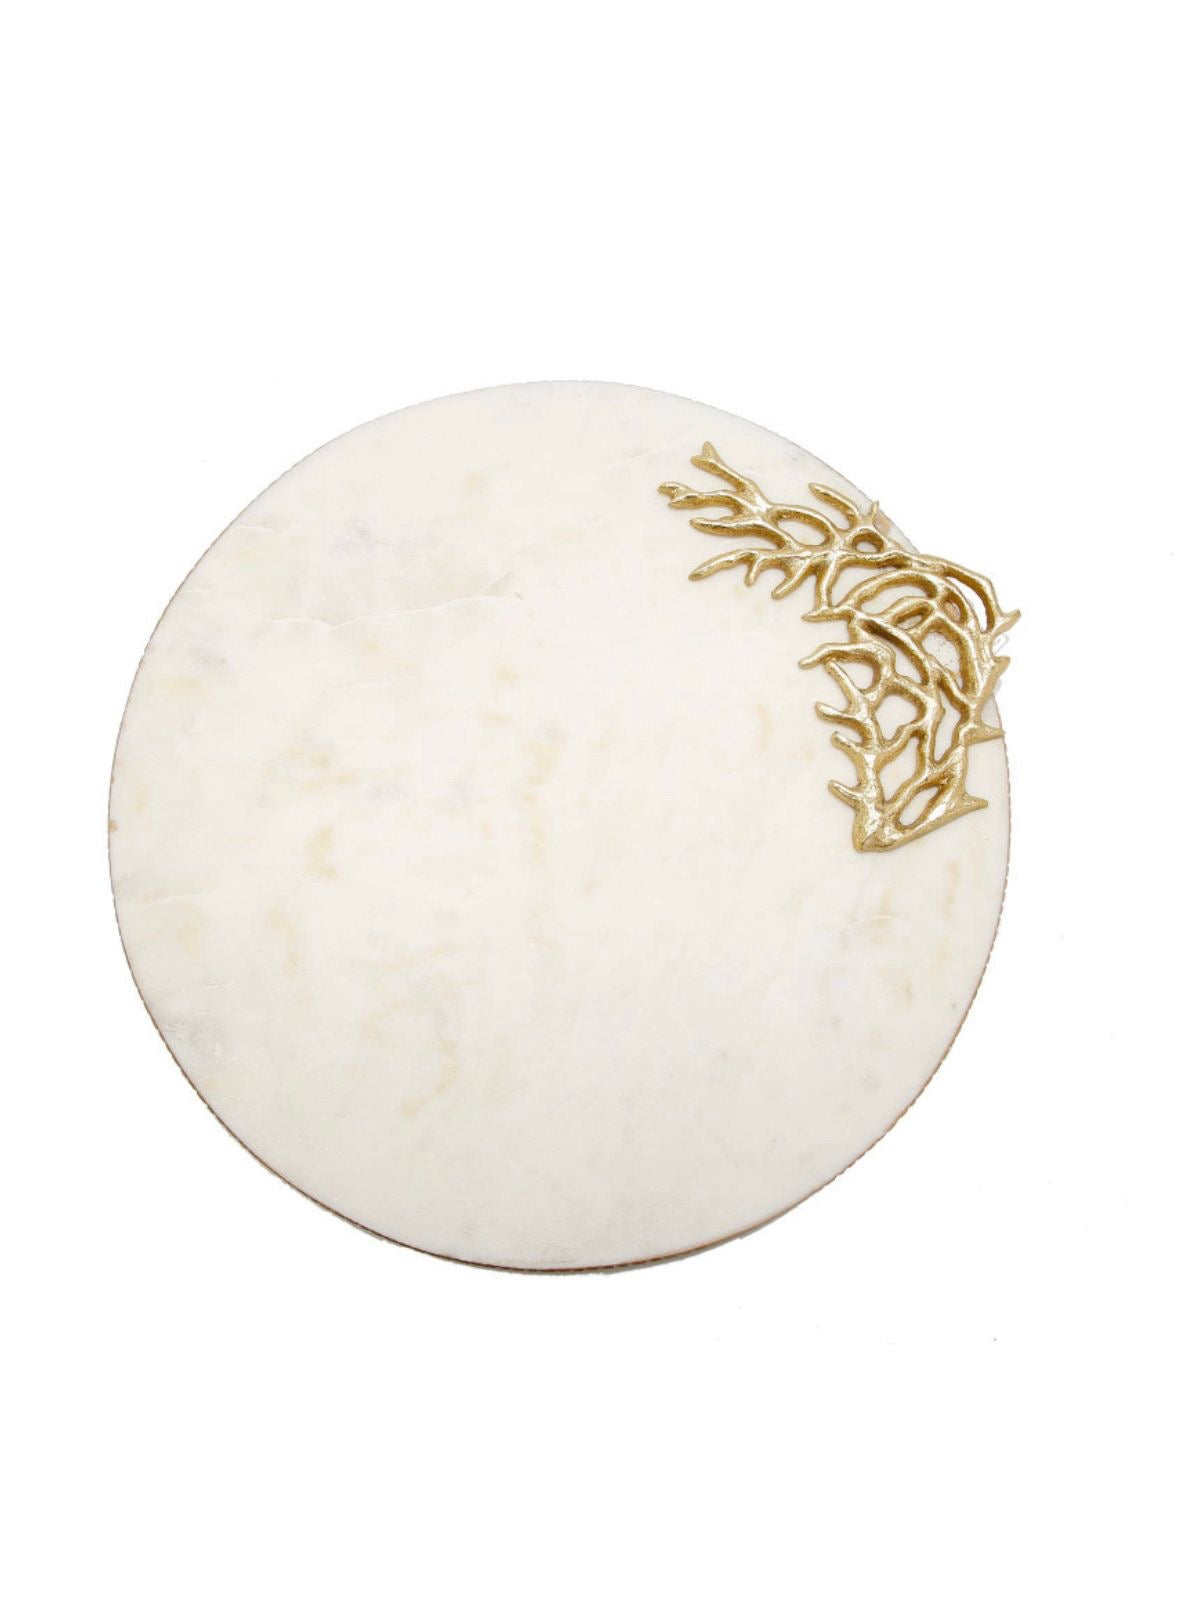 13D Round White Marble Serving Tray with Luxury Gold Branch Details and Gold Rim Top View - KYA Home Decor